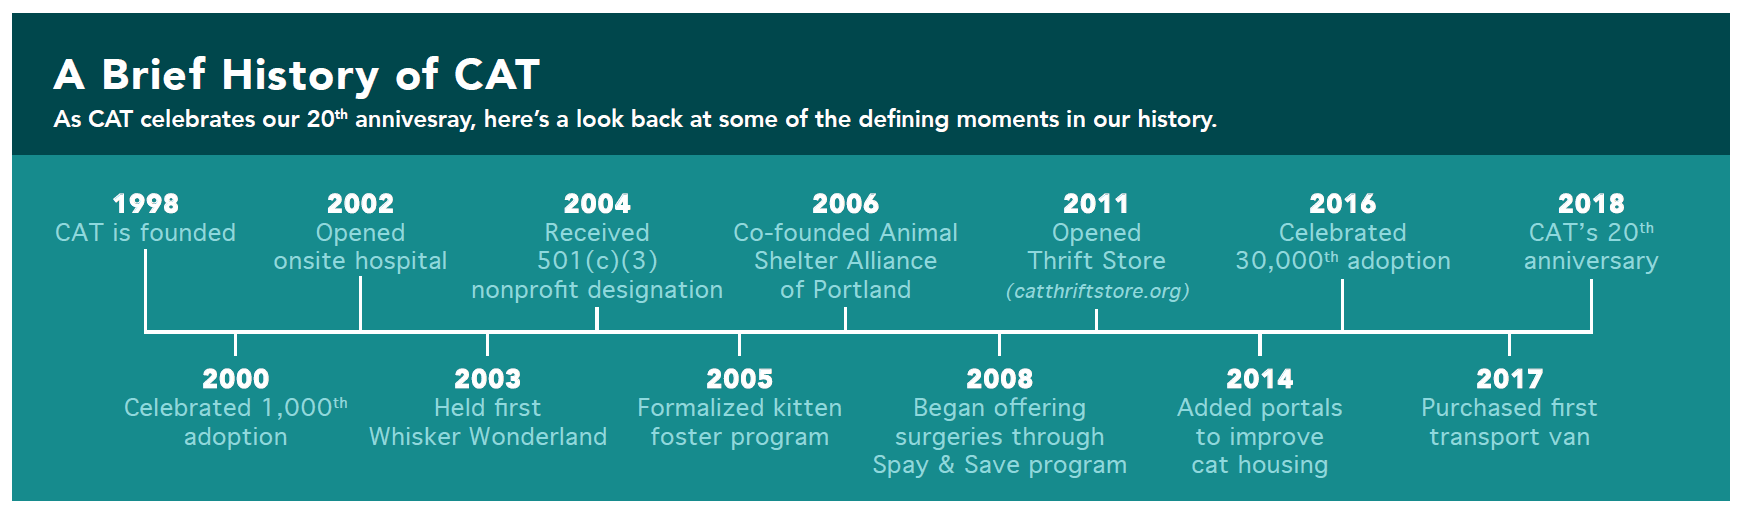 A brief timeline of some of CAT's major accomplishments between 1998 and 2018